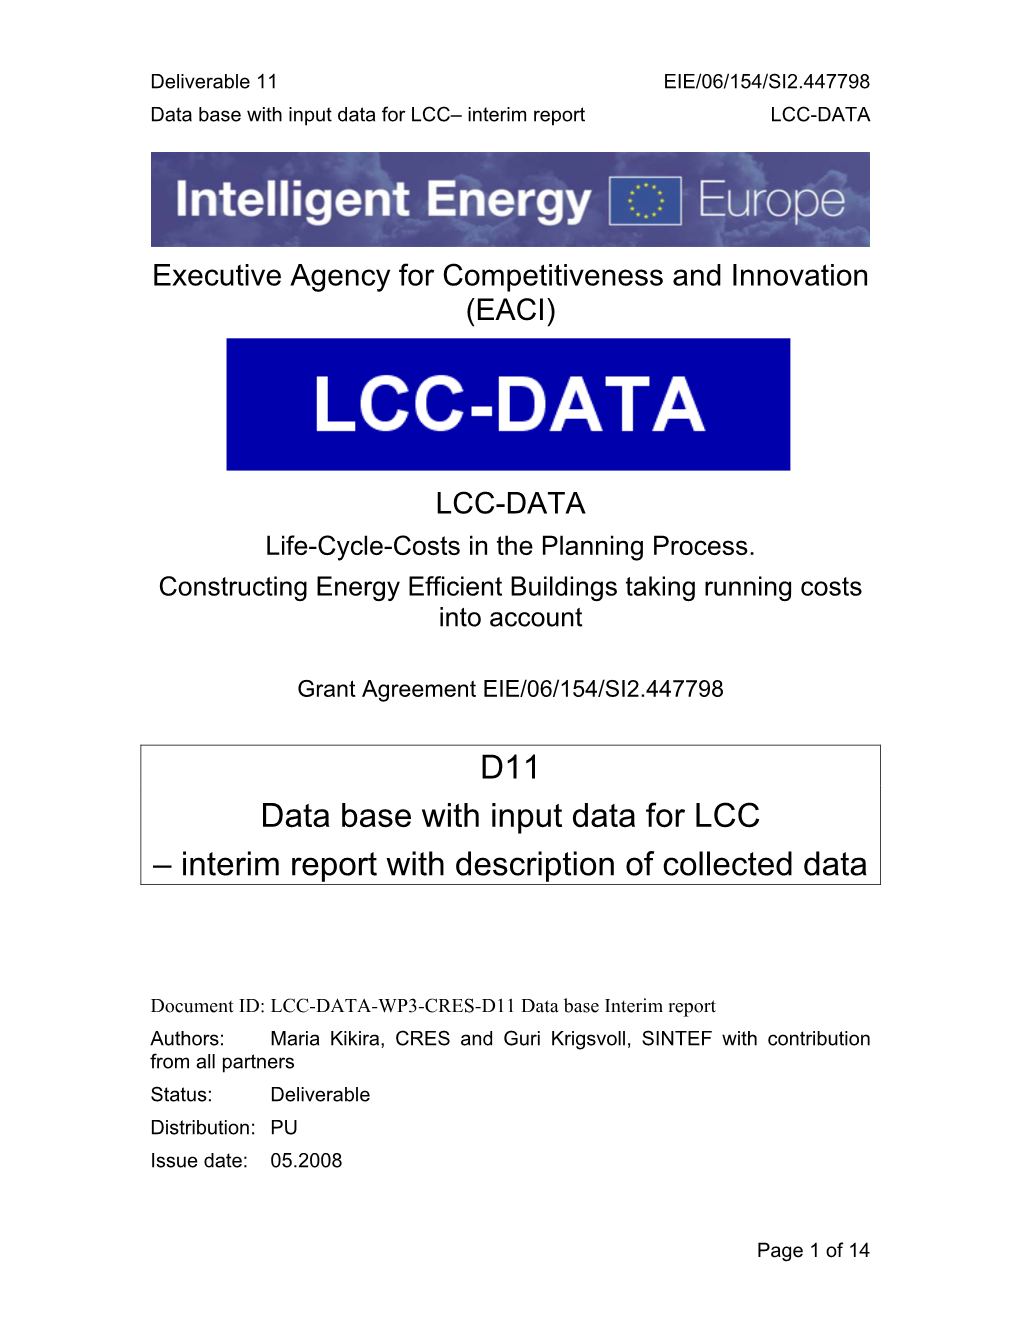 D11 Data Base with Input Data for LCC – Interim Report with Description of Collected Data